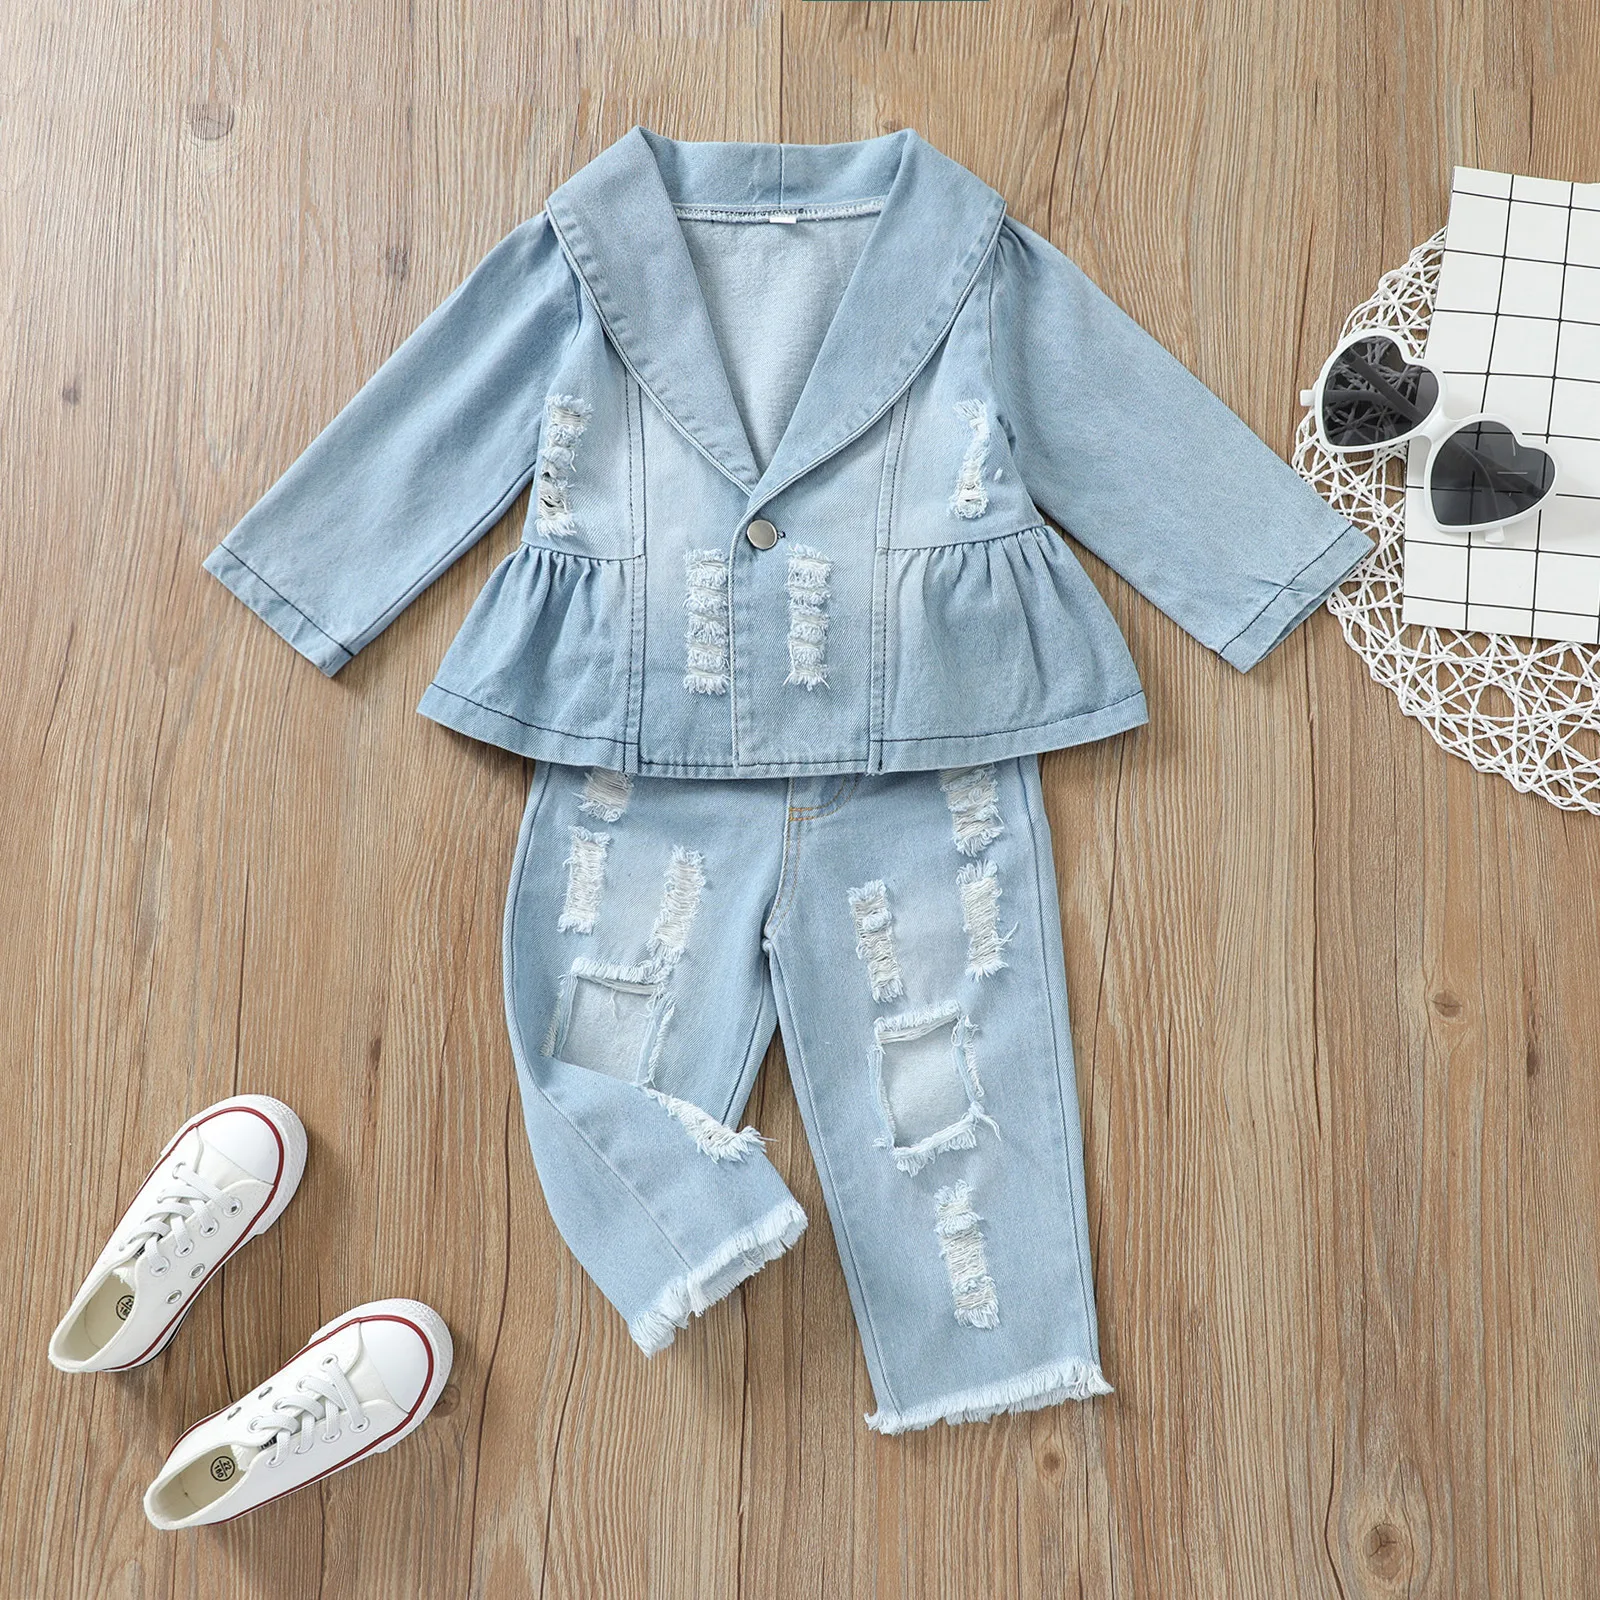 Spring Autum Baby Boy Boutique Clothing Set Fashion Boys Denim Jacket And  Pants 2 Piece Outfits Kids Bebes Girls Suits 2-9 Years - Children's Sets -  AliExpress